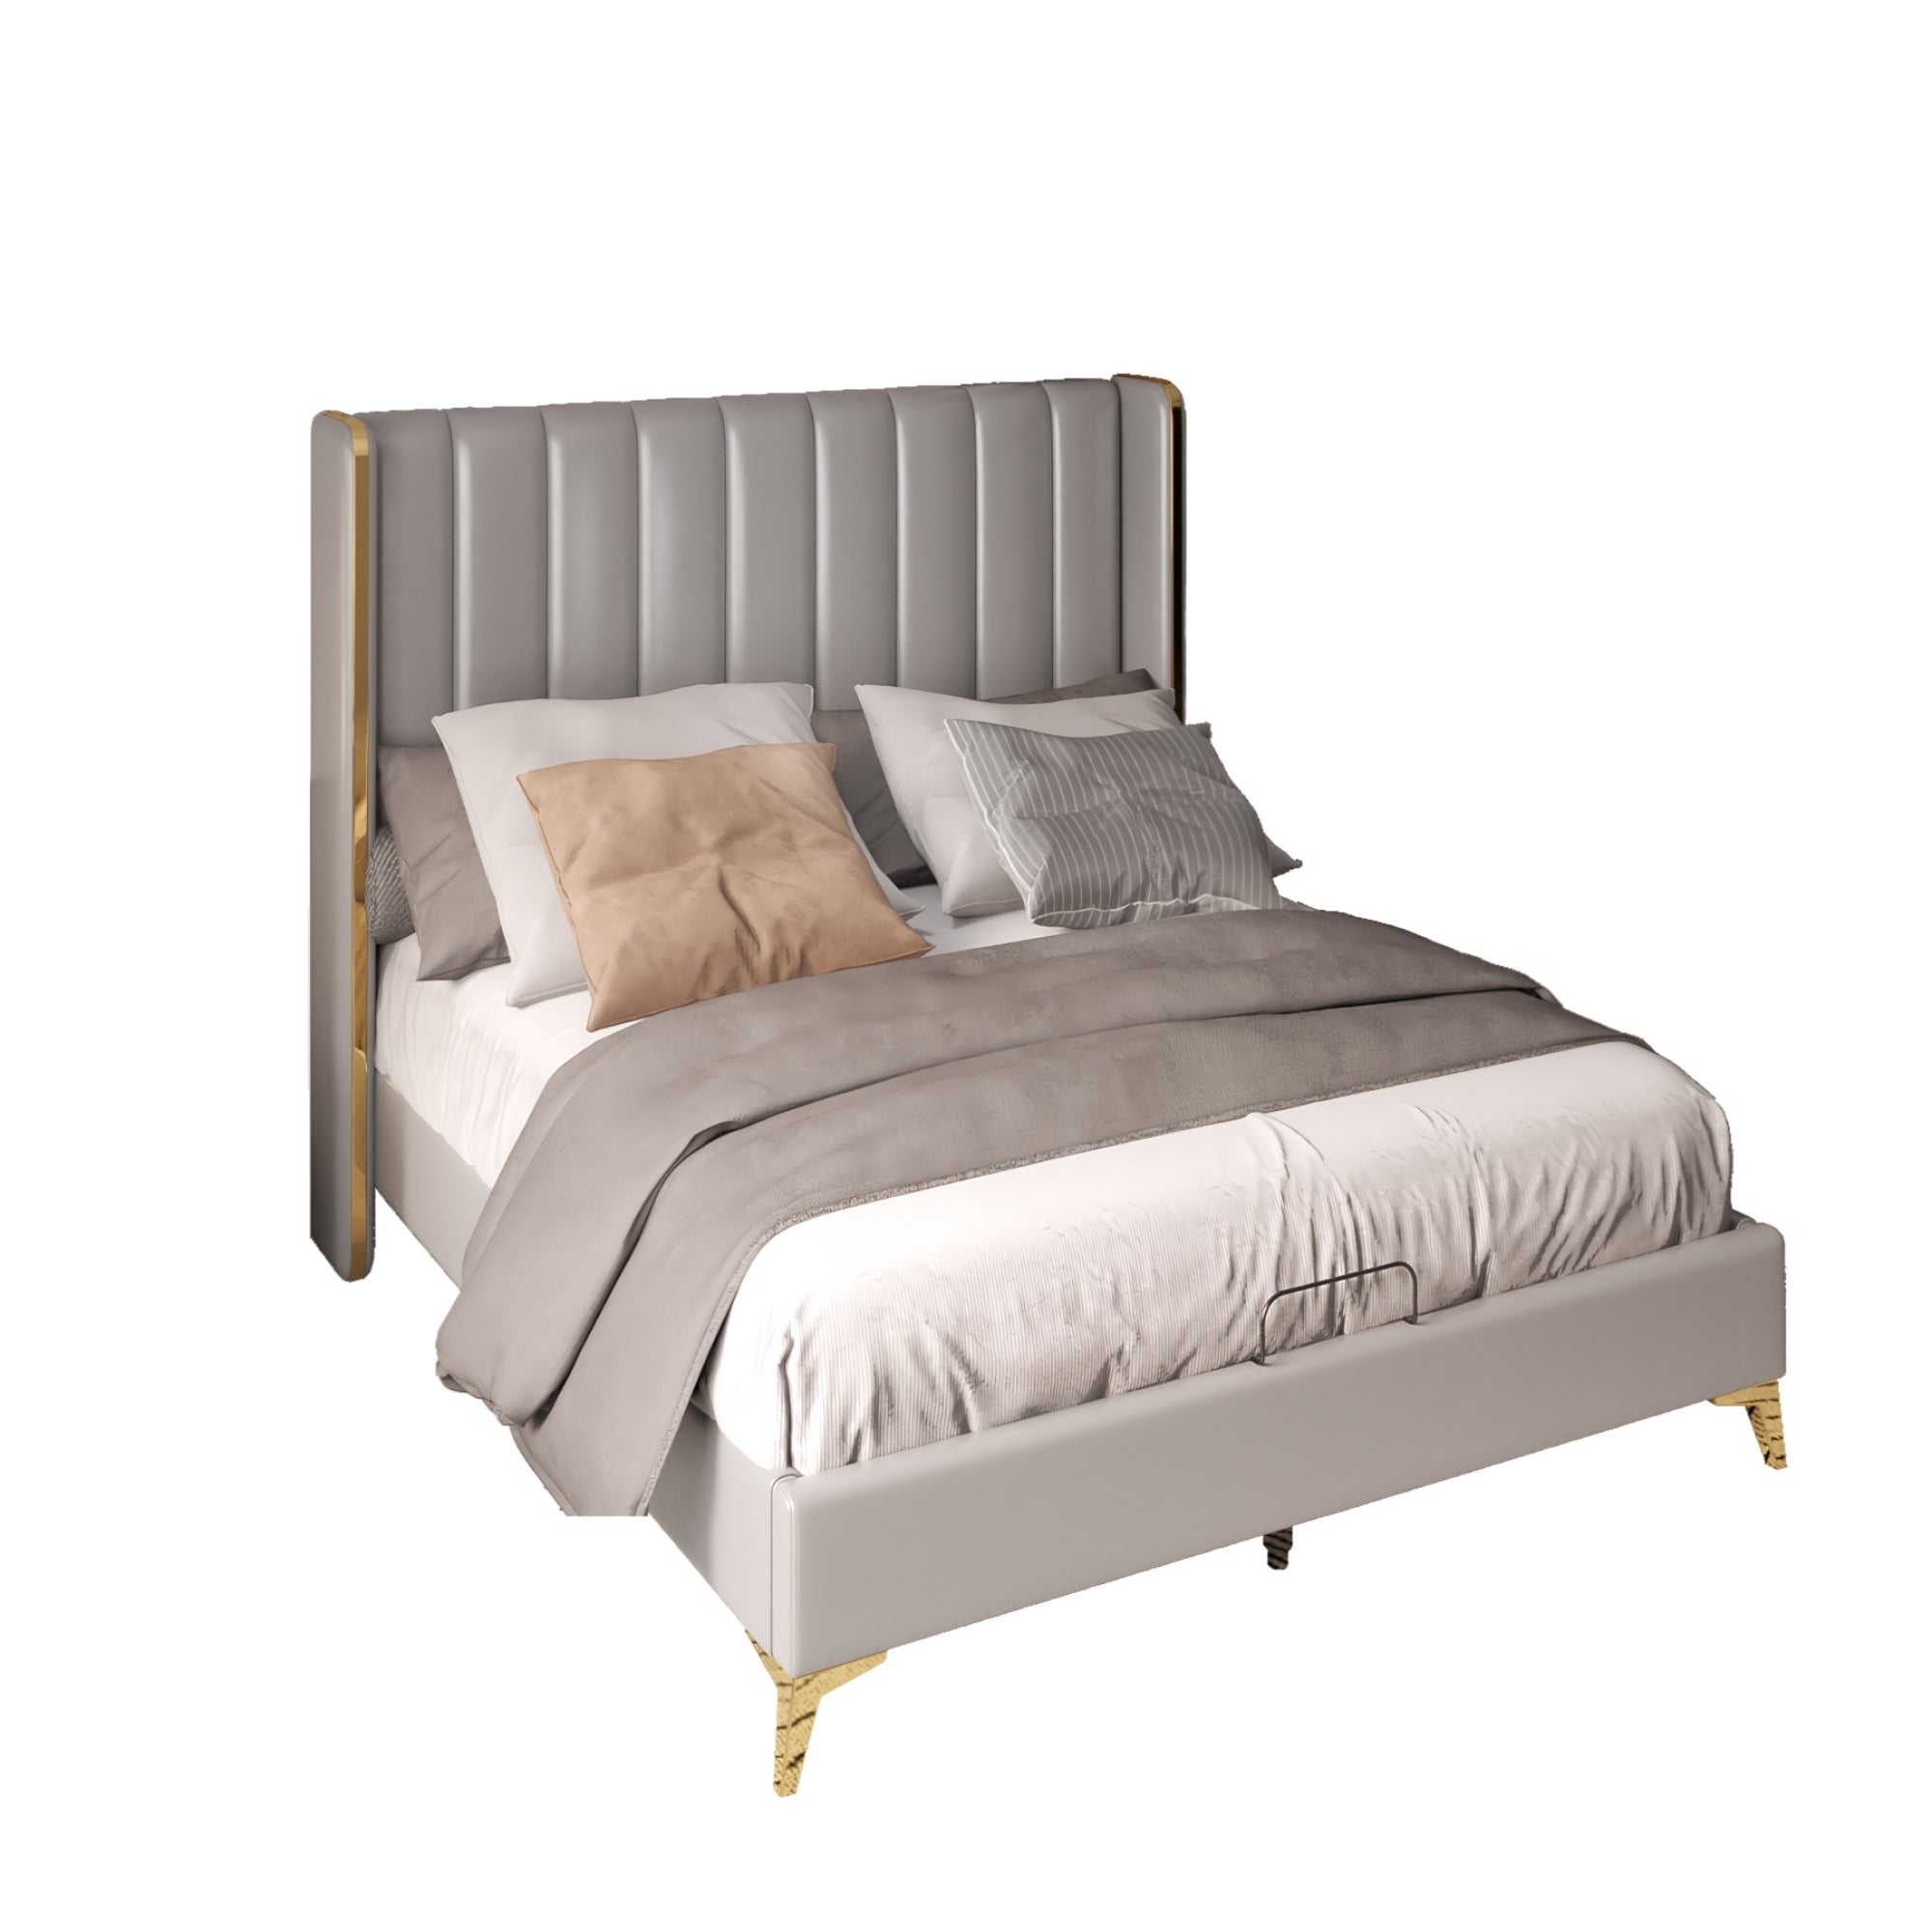 56" Tall Headboard Channel Tufted Upholstered Platform Bed with Thickening Pinewooden Slats and Metal Leg, Queen Size Bed Frame - Light Grey